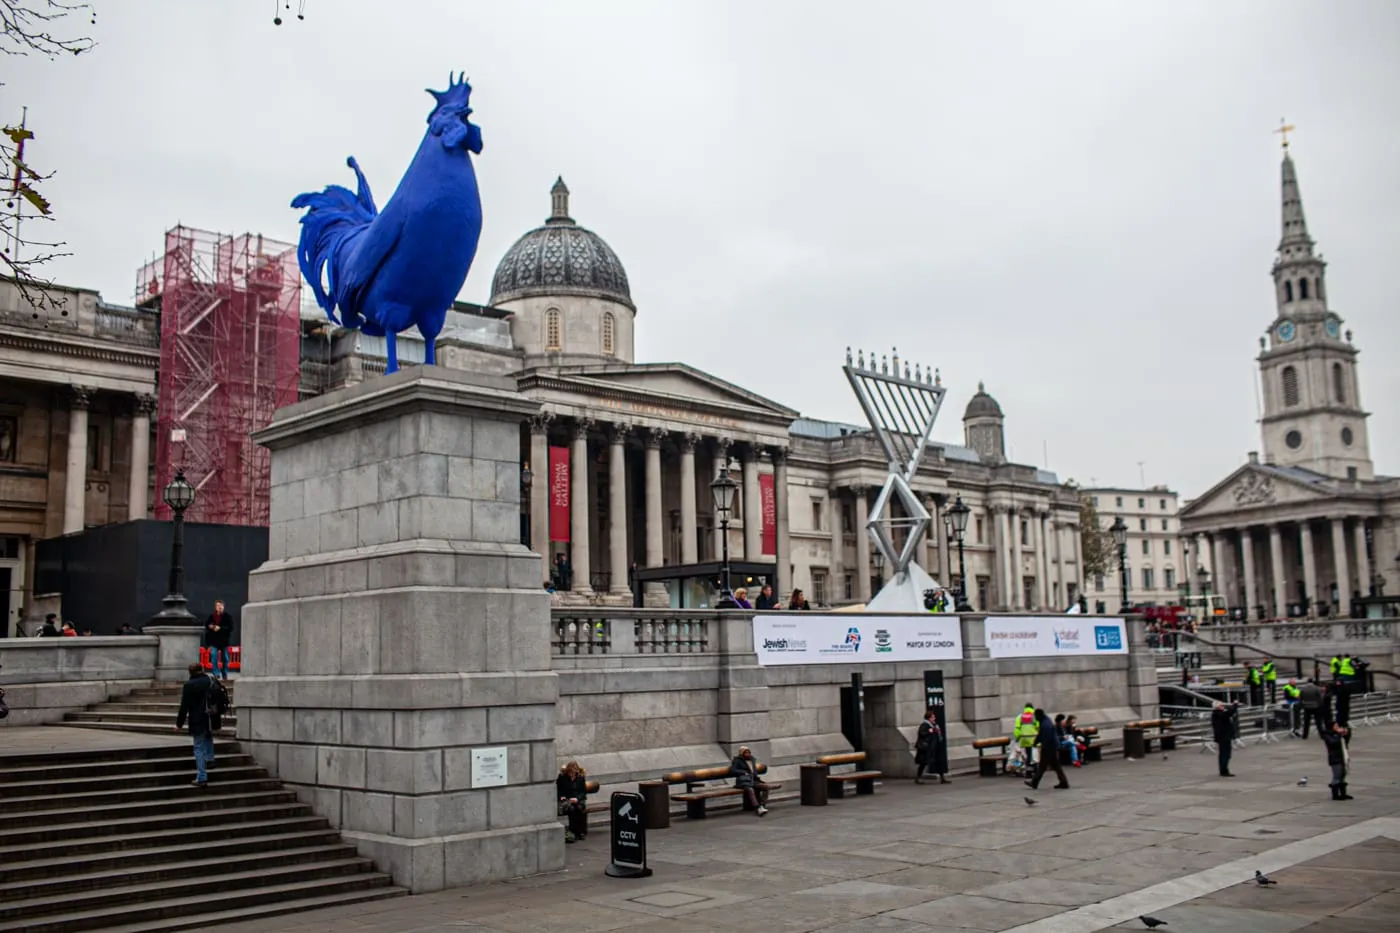 Katharina Fristc's Hahn/Cock - a big blue rooster -  in Trafalgar Square in London, England.